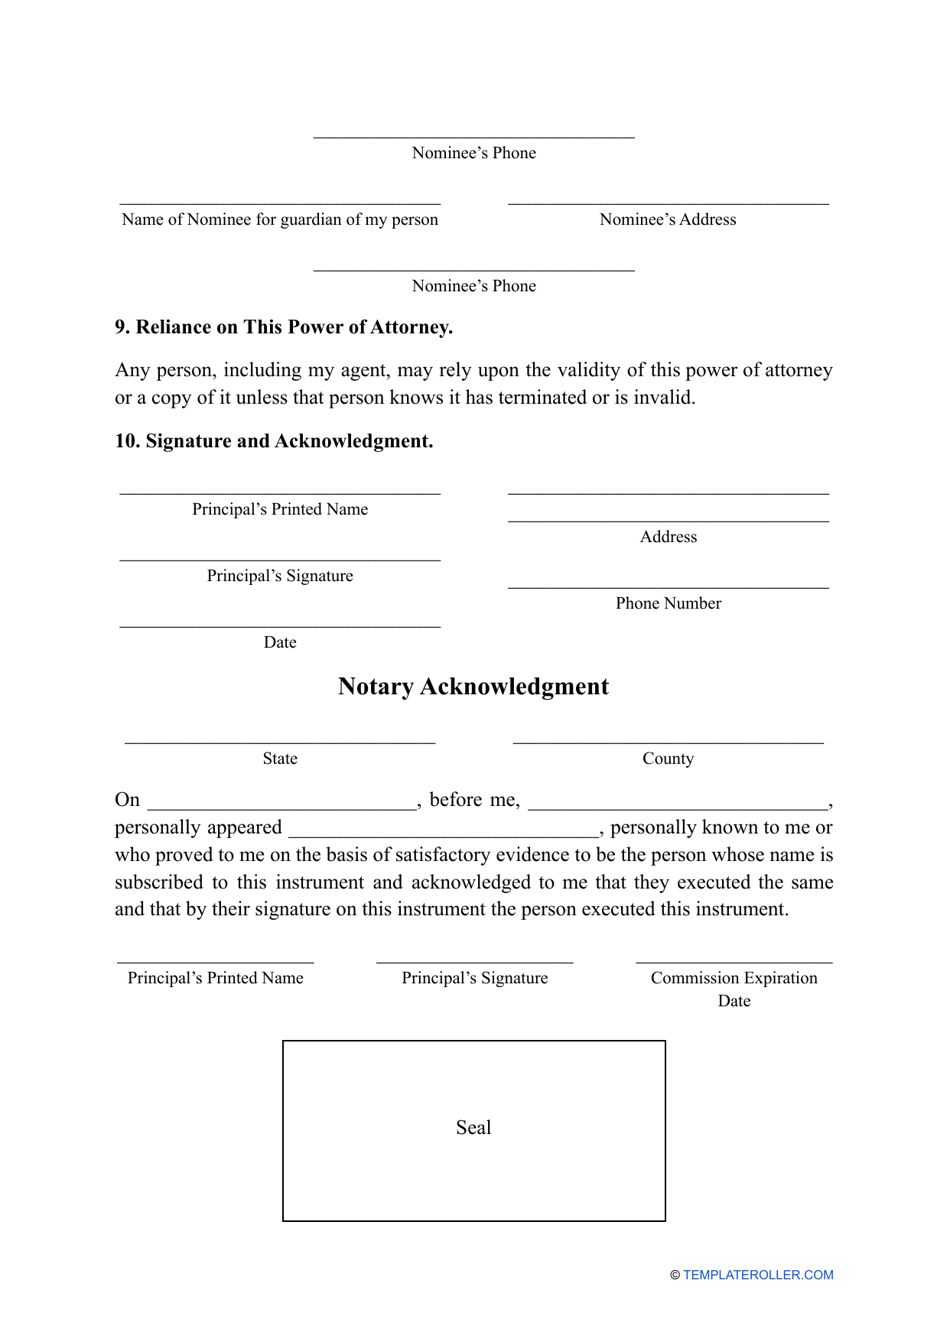 Montana Durable Power Of Attorney Form Fill Out Sign Online And Download Pdf Templateroller 8153